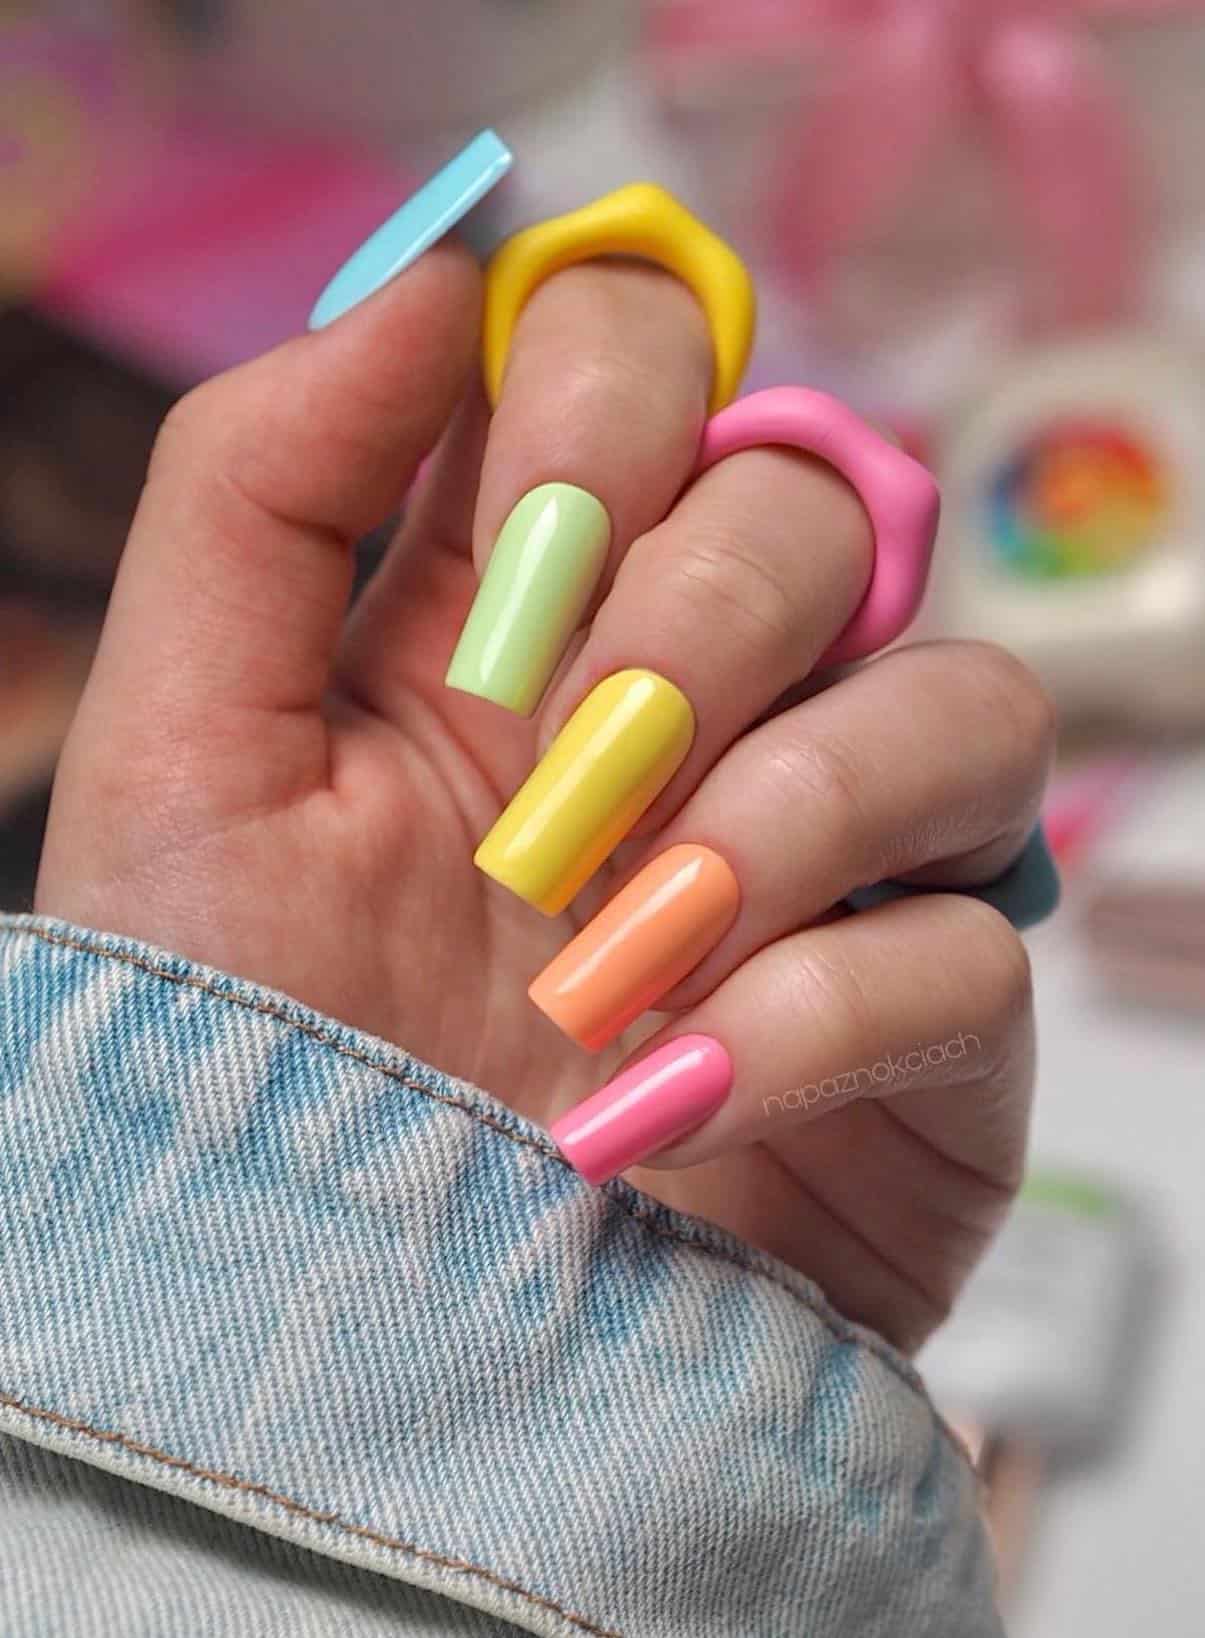 A hand with long square nails painted with bright summer colors in a gradient rainbow design